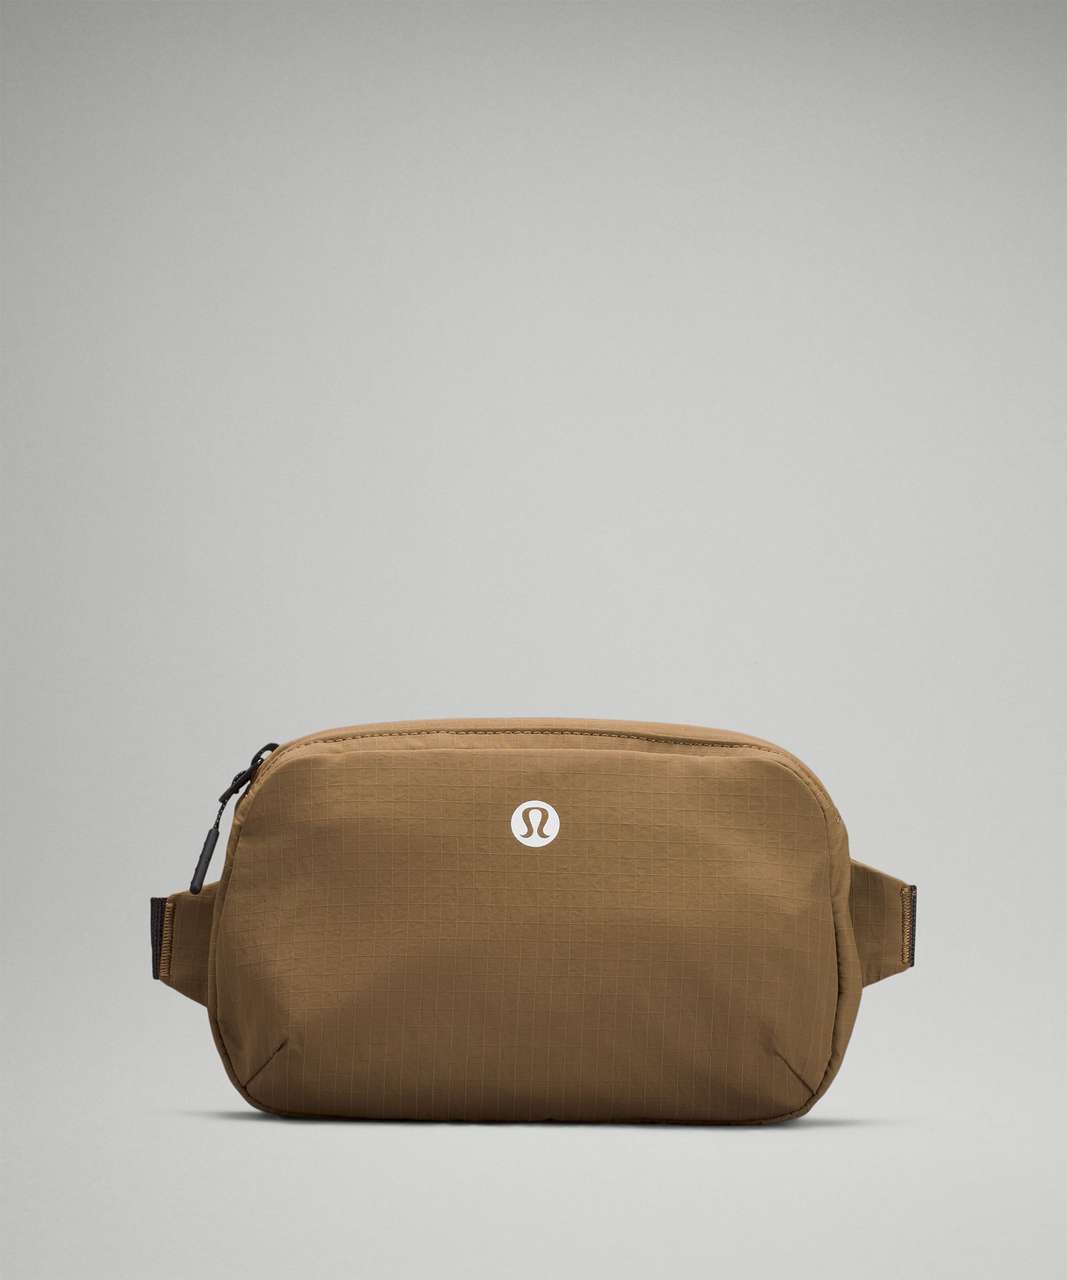 Lululemon Pack and Go Multi Wear Bag - Artifact / Ancient Copper ...